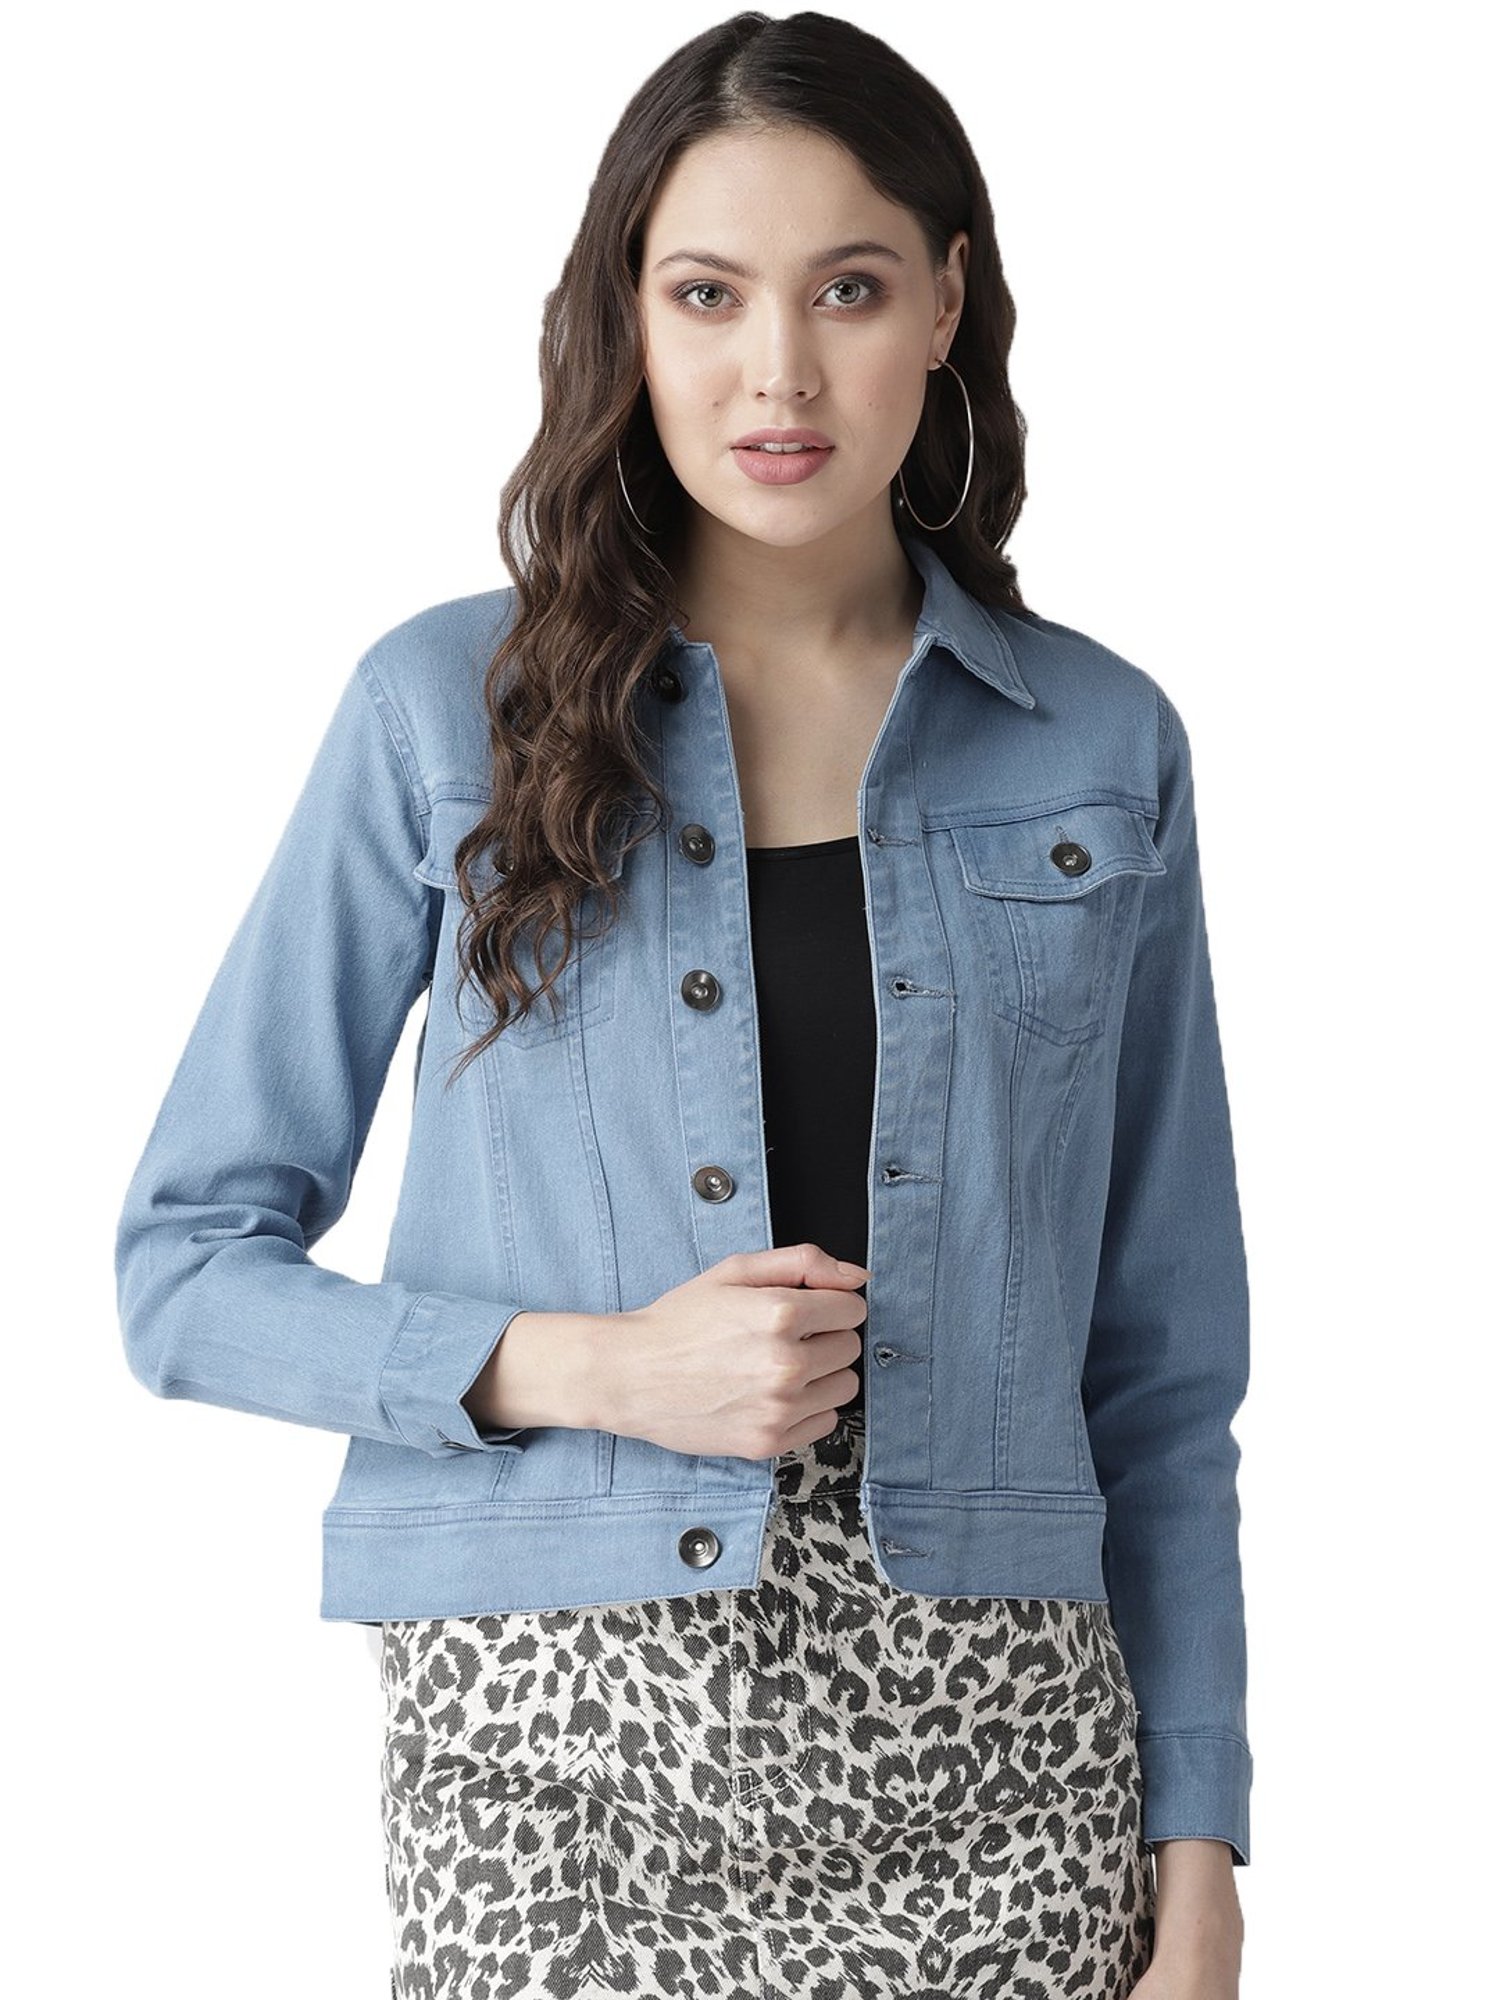 Buy Teal Blue Jackets & Coats for Women by ALTHEORY SPORT Online | Ajio.com